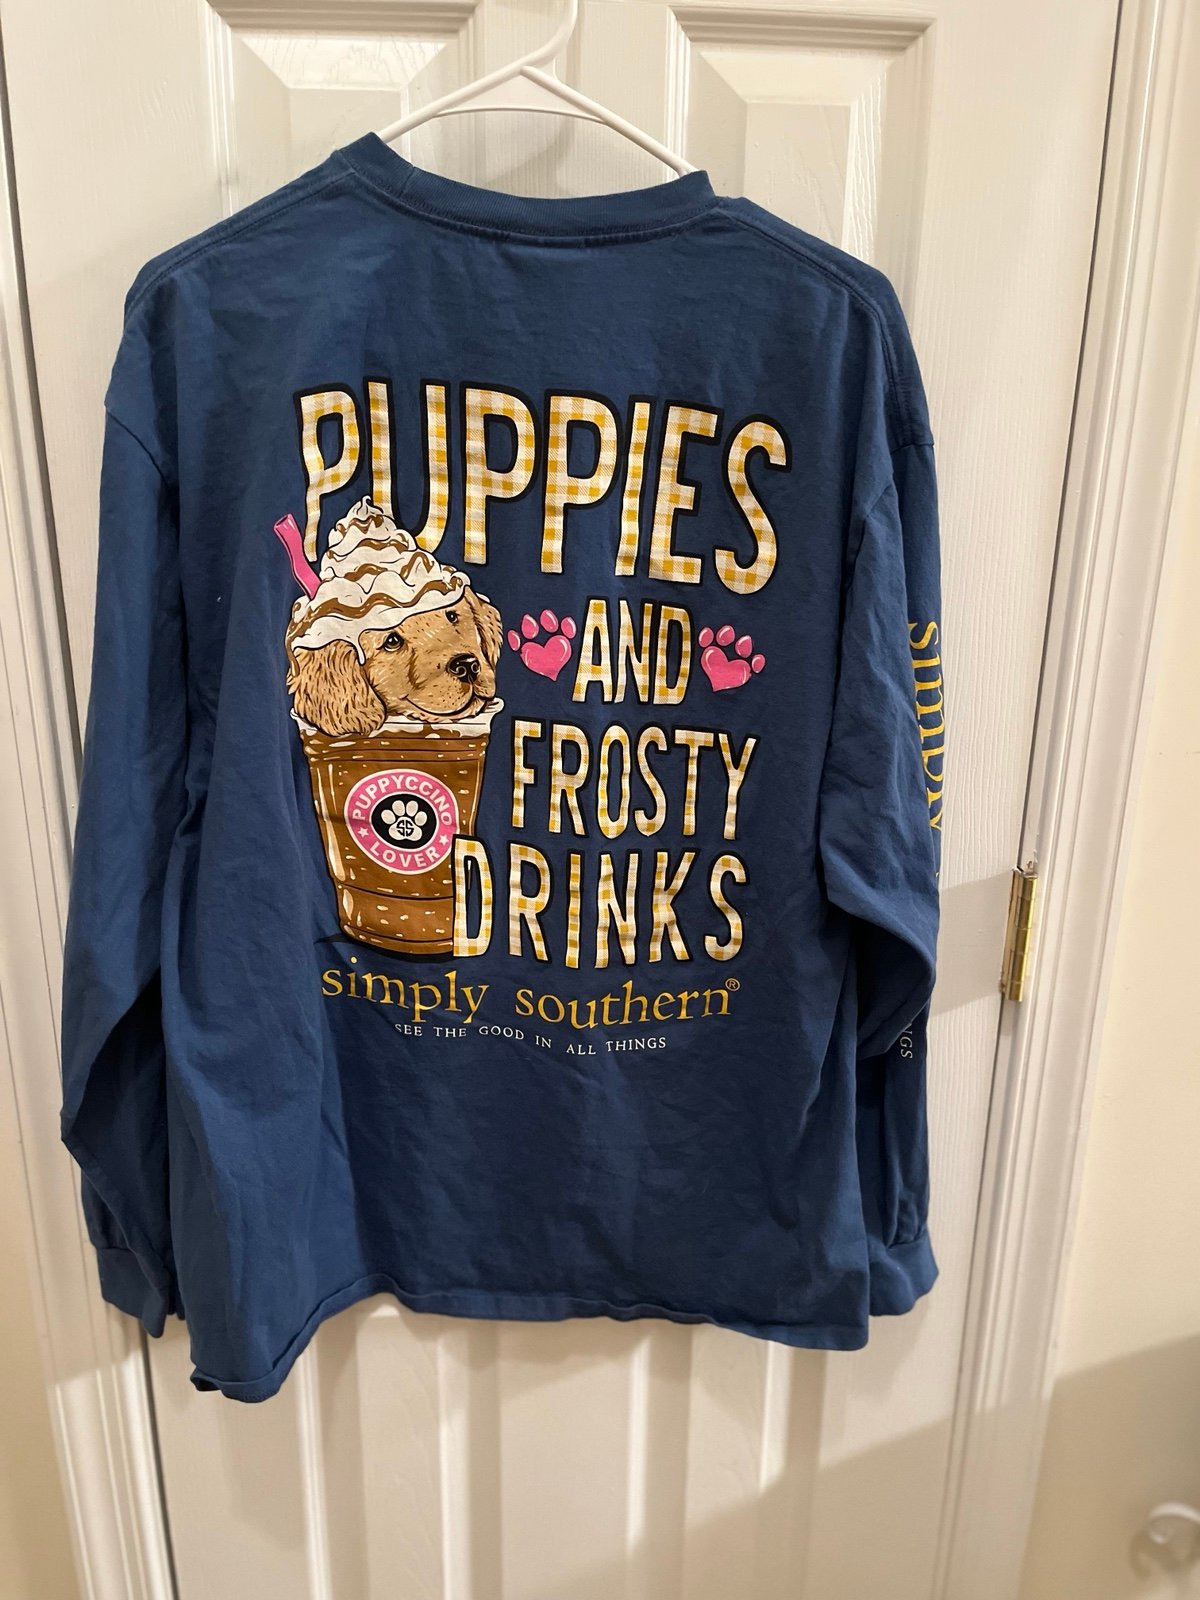 big discount Simply Southern puppies puppies and frosty